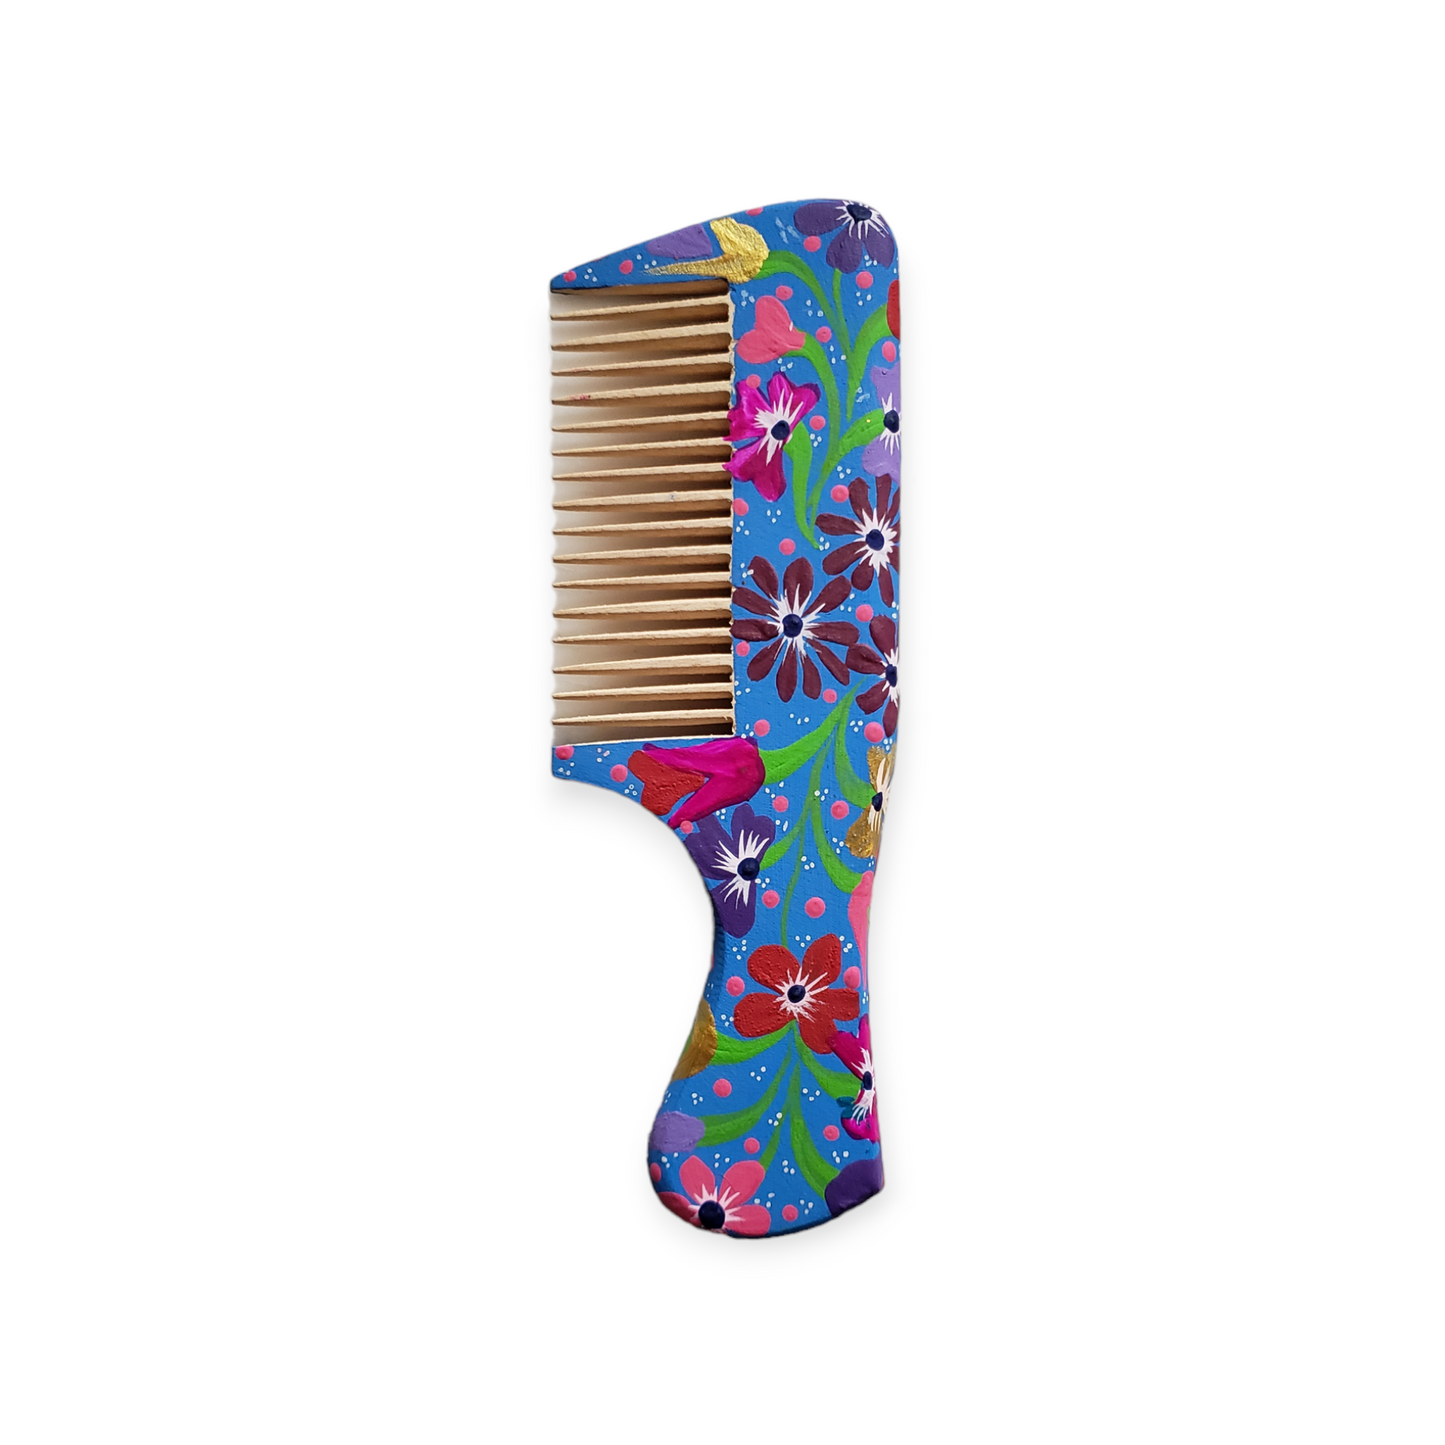 Hand-painted Wooden Mexican Comb